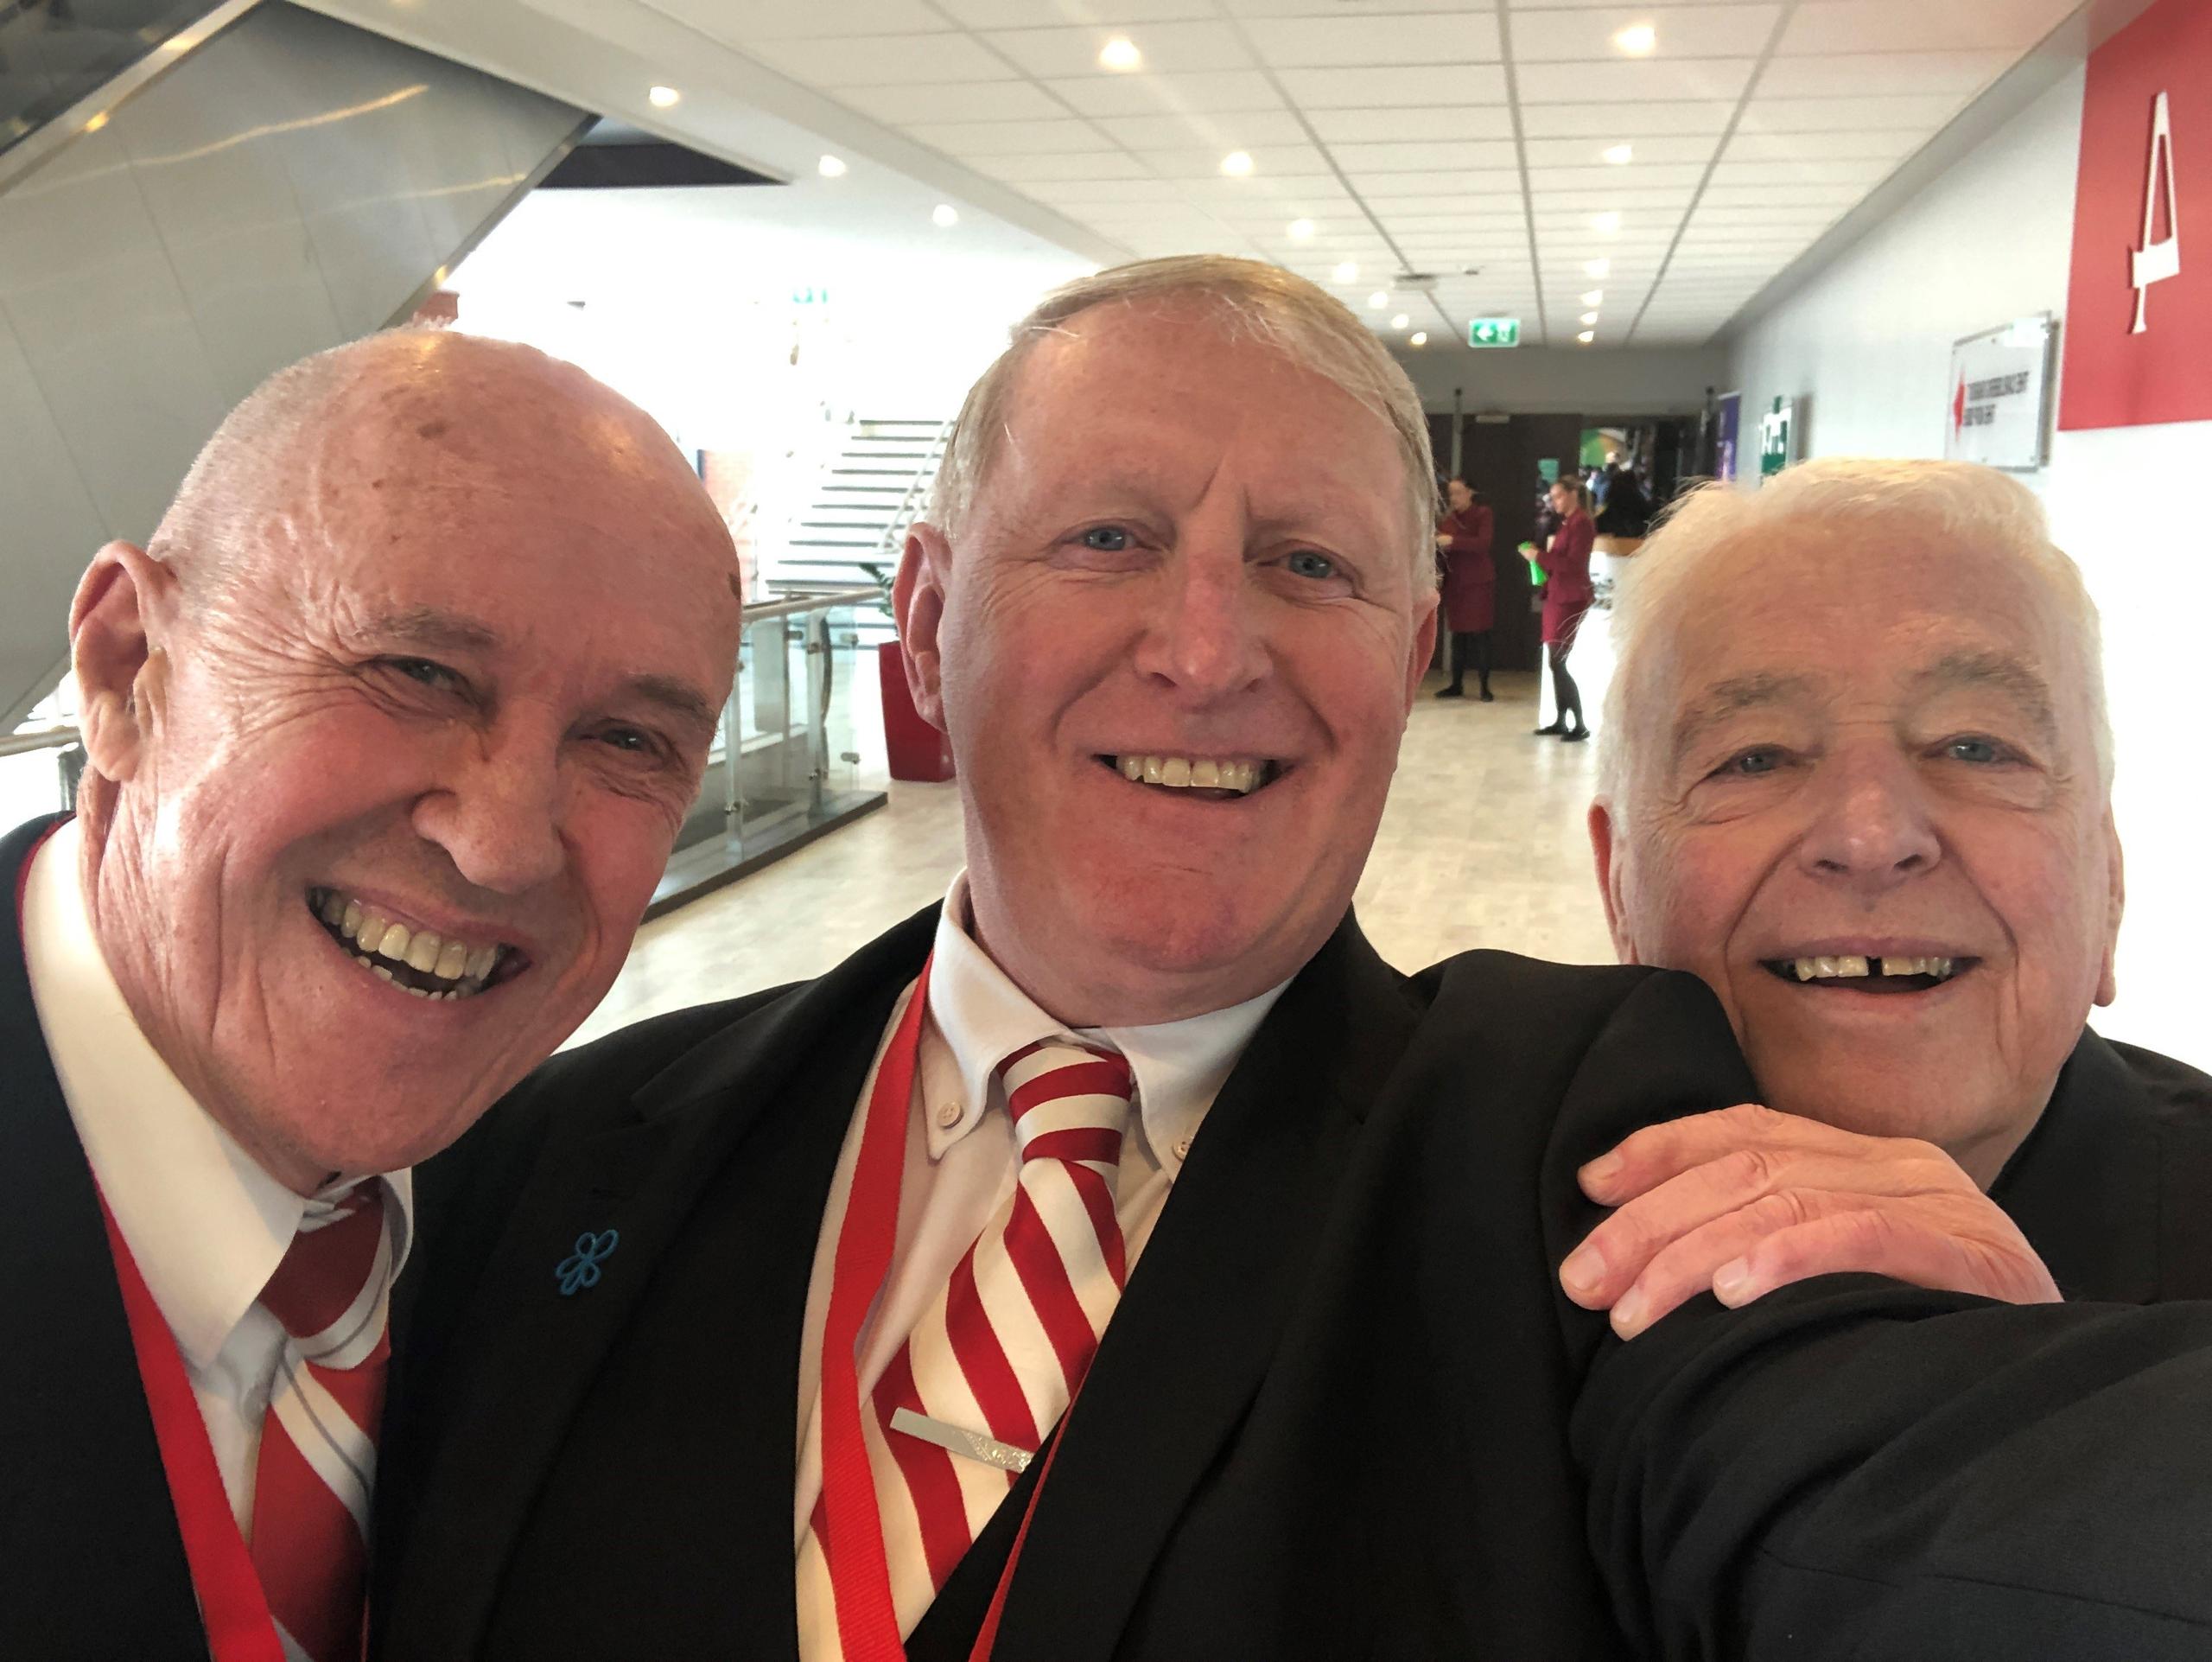 Lounge guests Phil Neal and Ian Callaghan